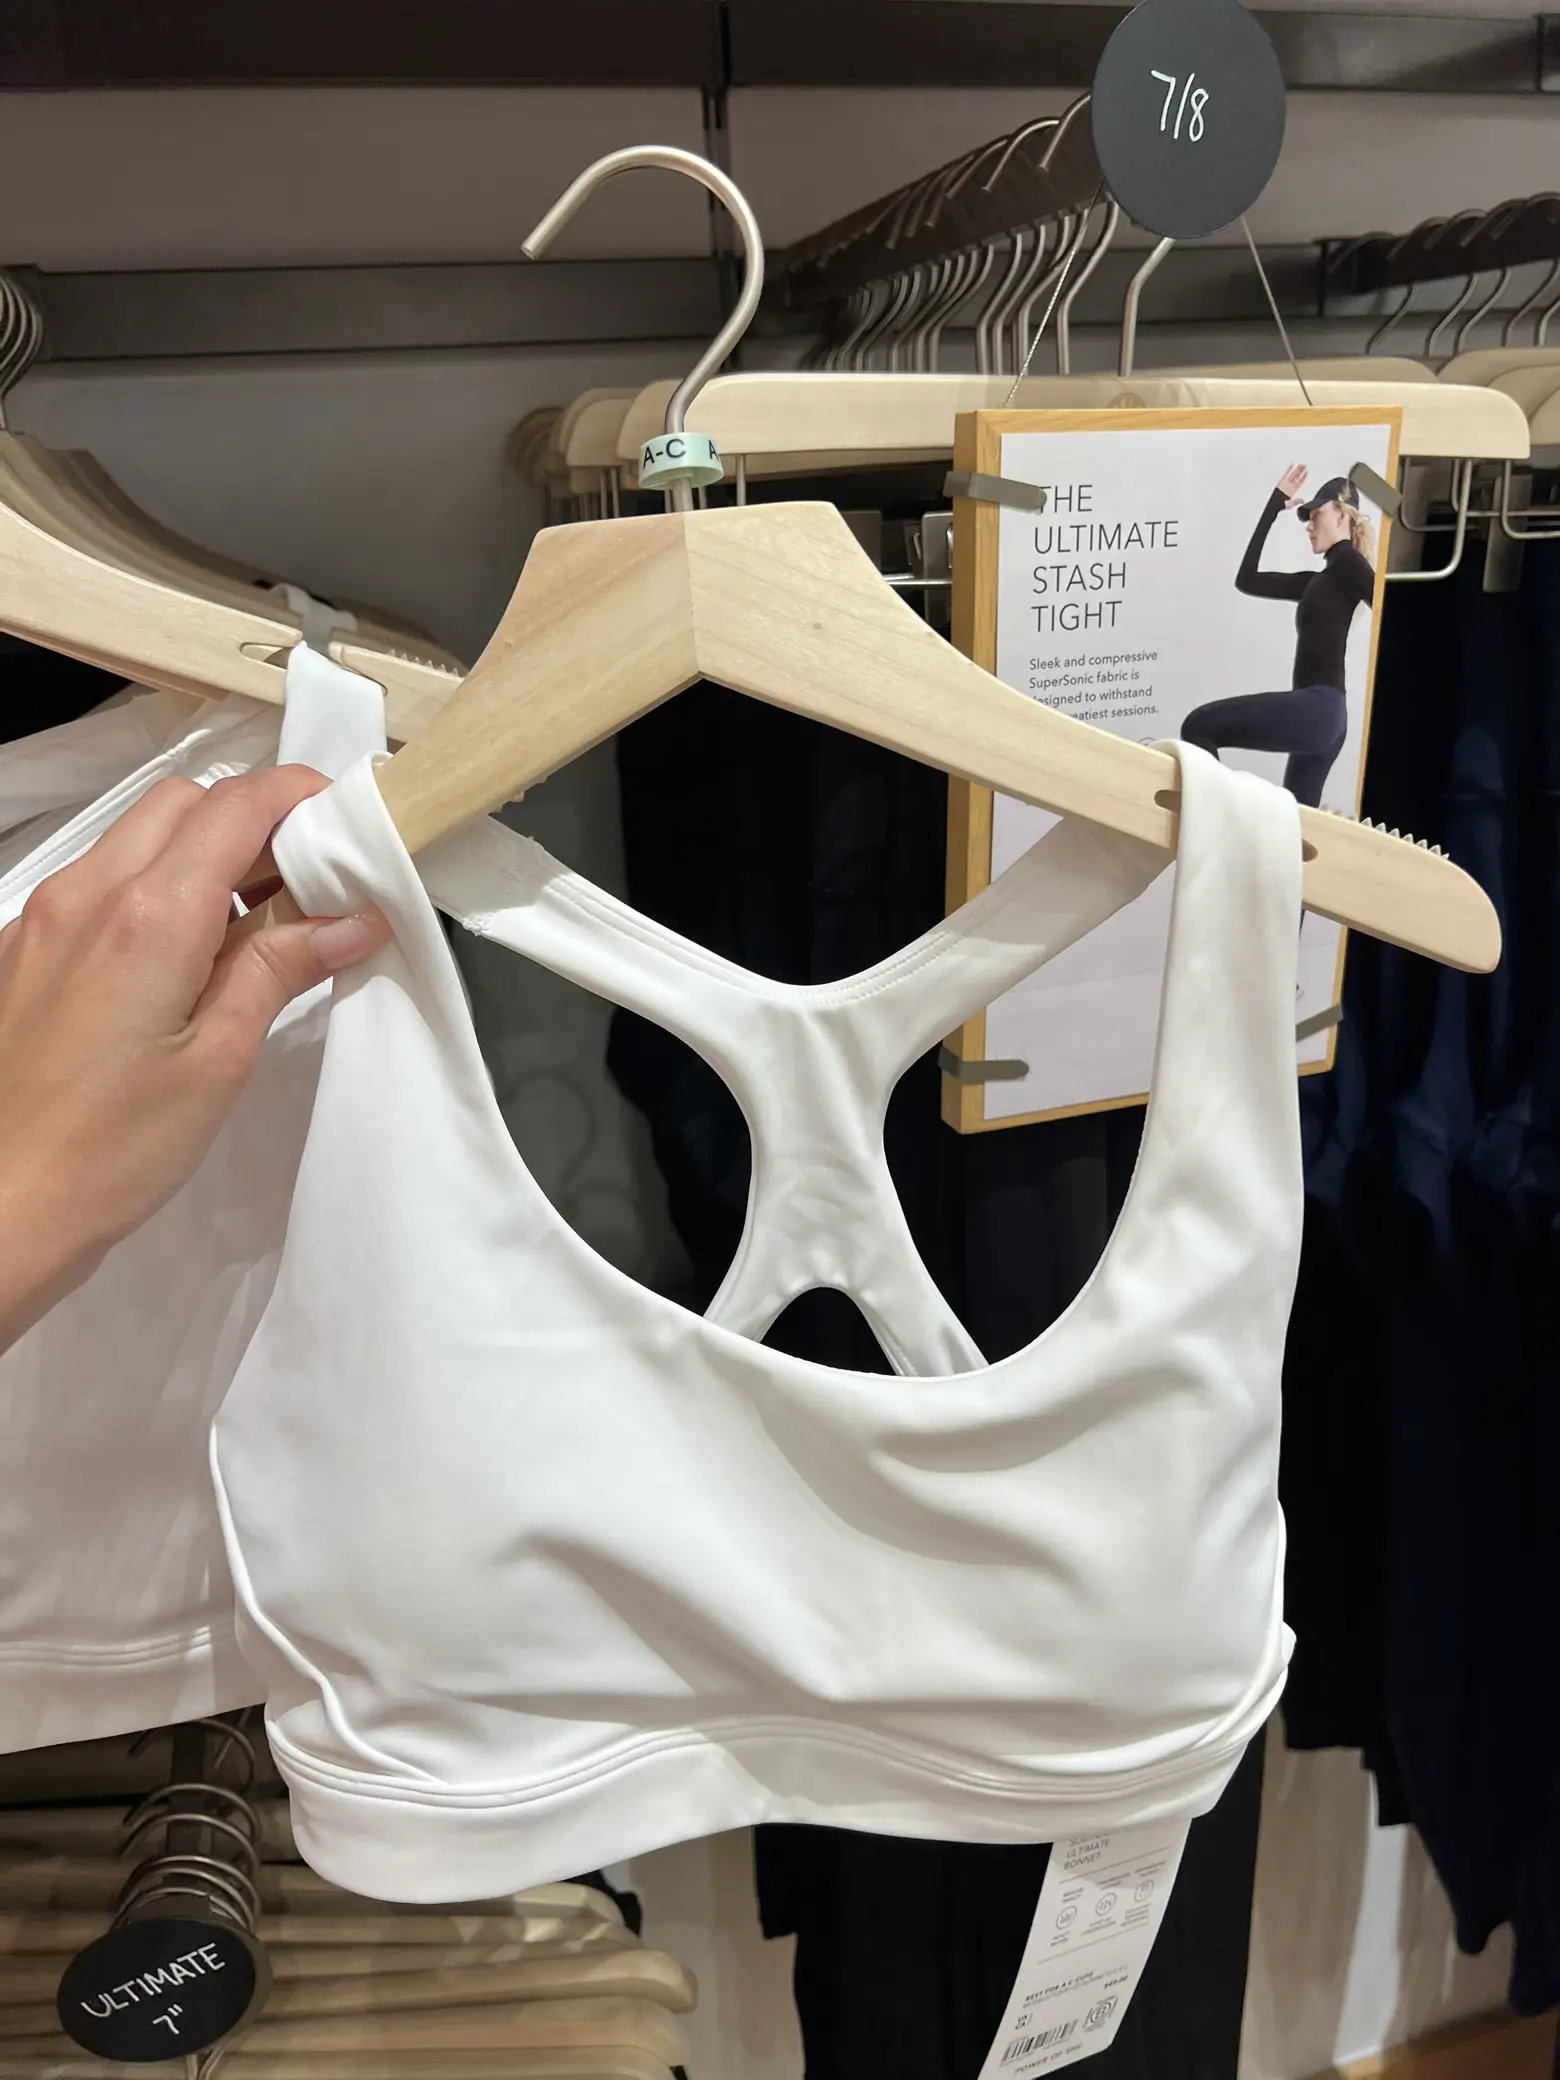 Activewear I found at Athleta!  Gallery posted by Biancacristino